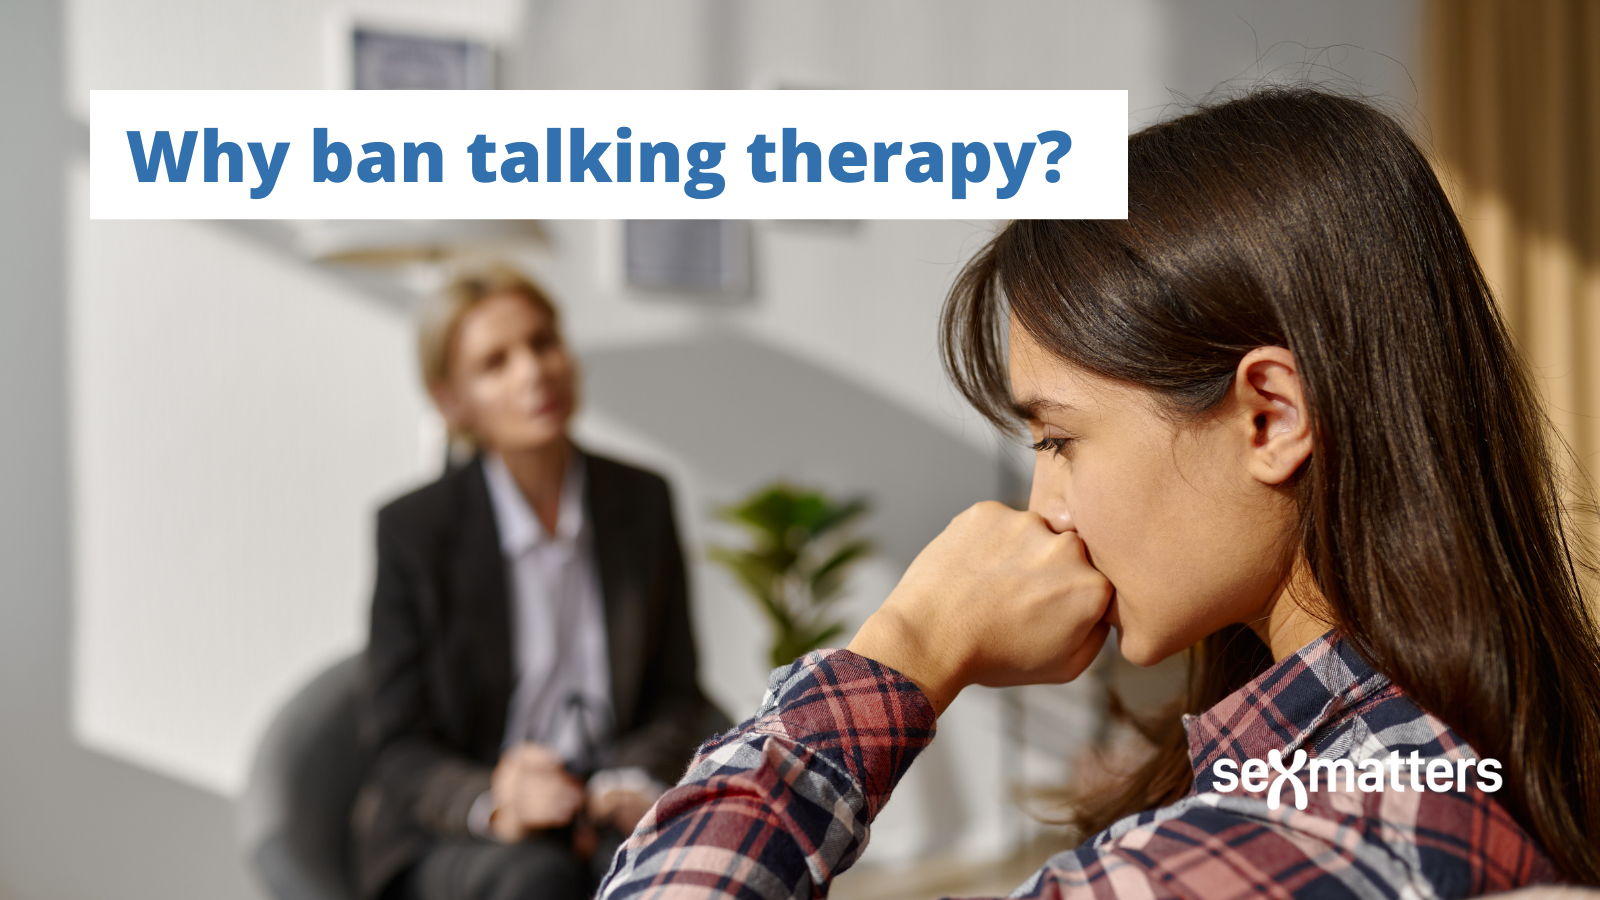 Why ban talking therapy?